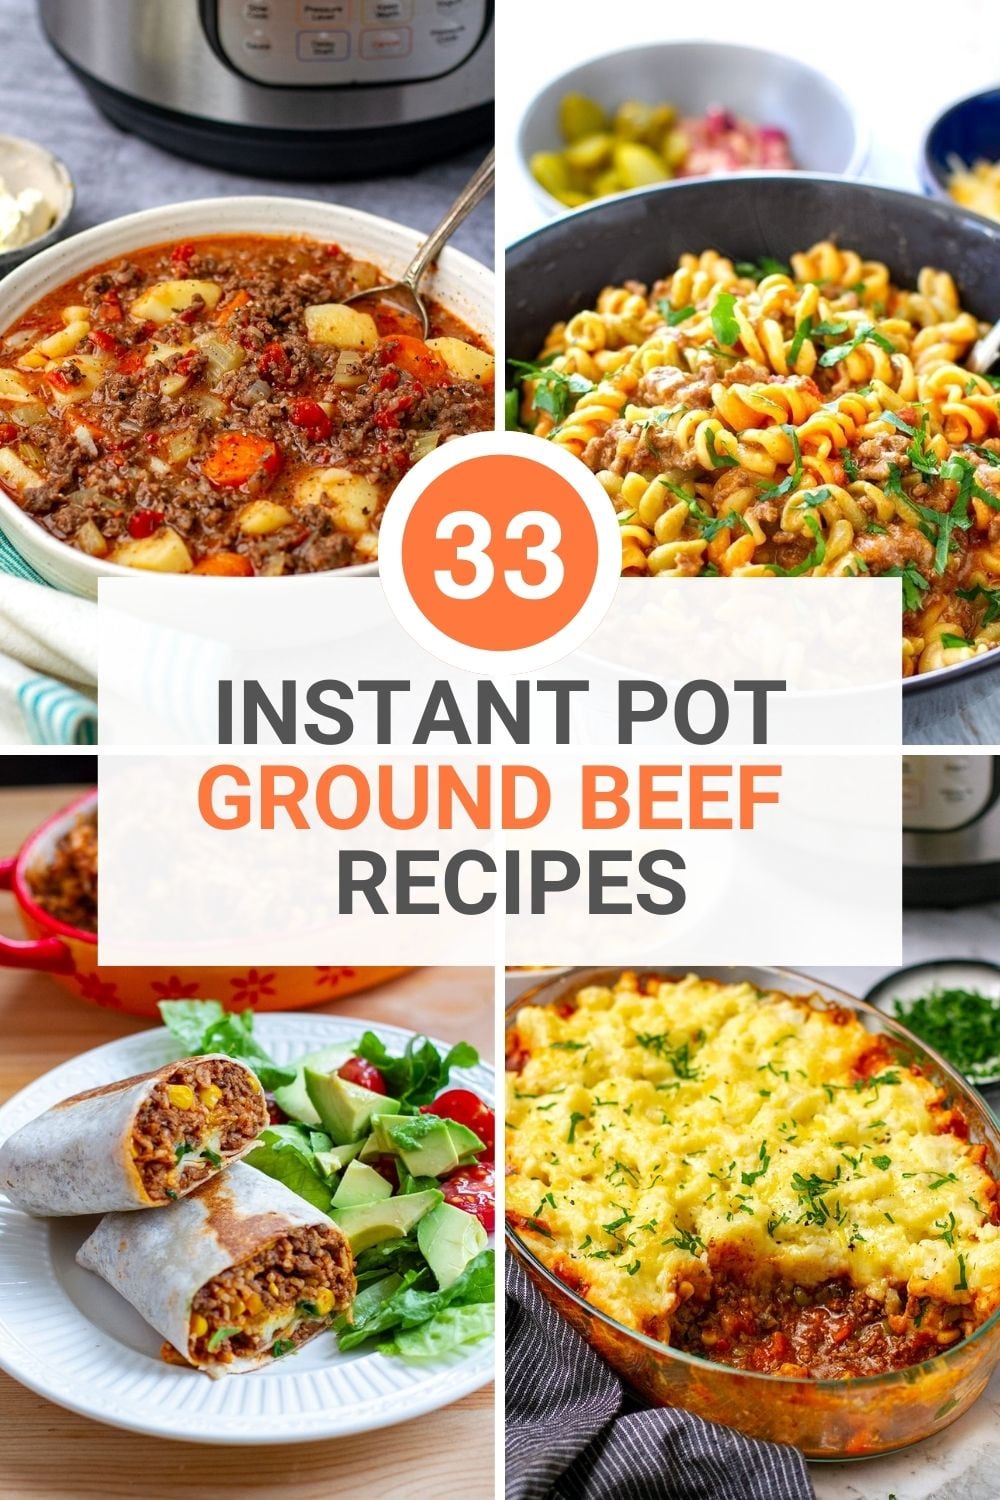 The BEST Instant Pot Ground Beef Recipes